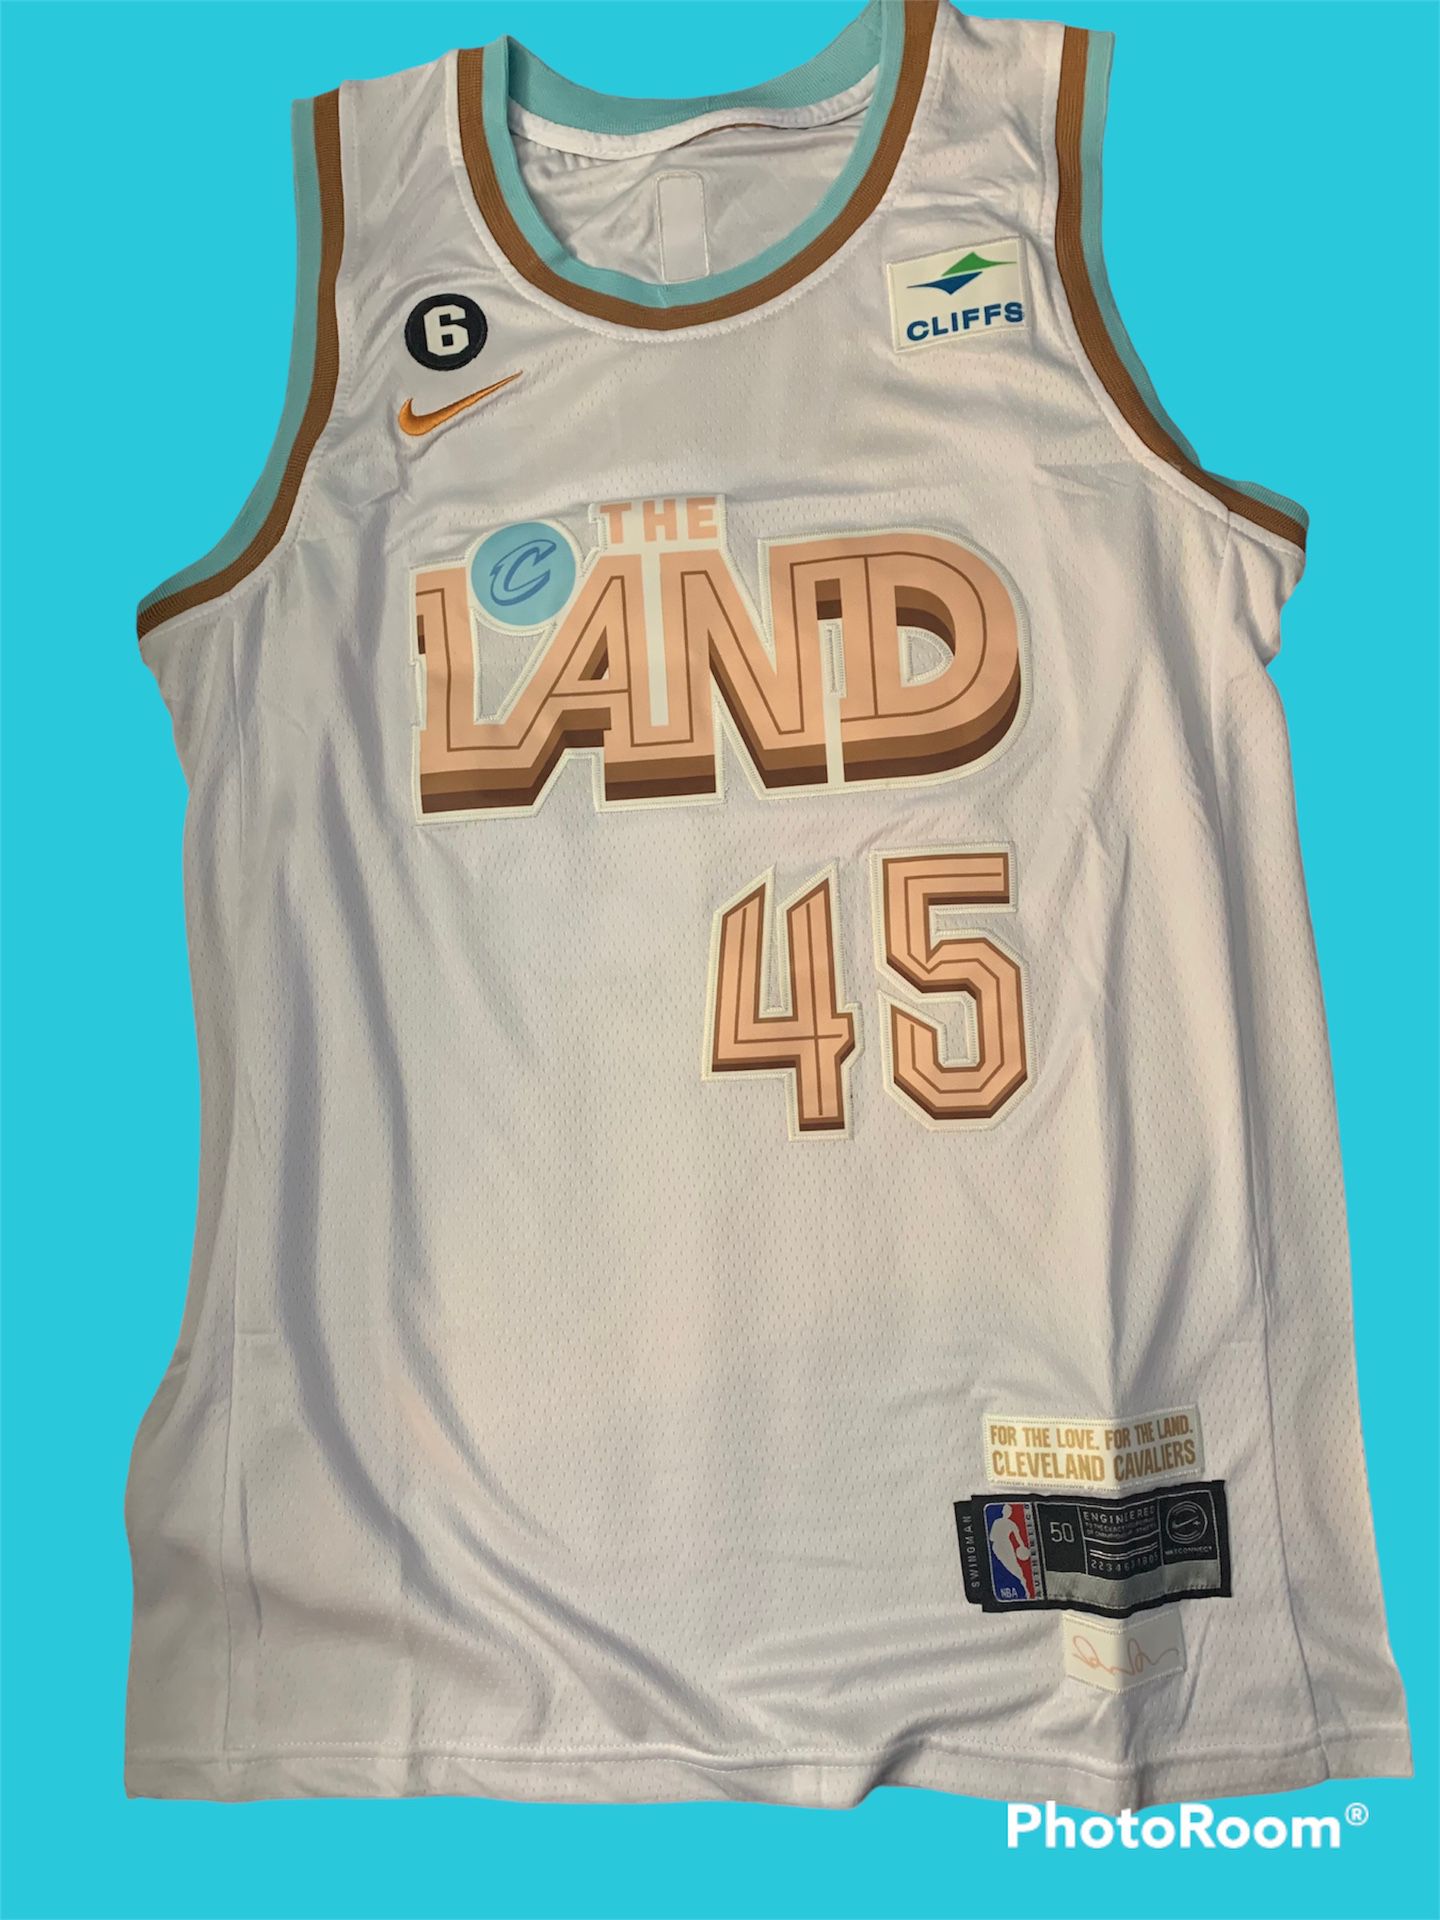 NBA Jerseys for sale in Cleveland, Ohio